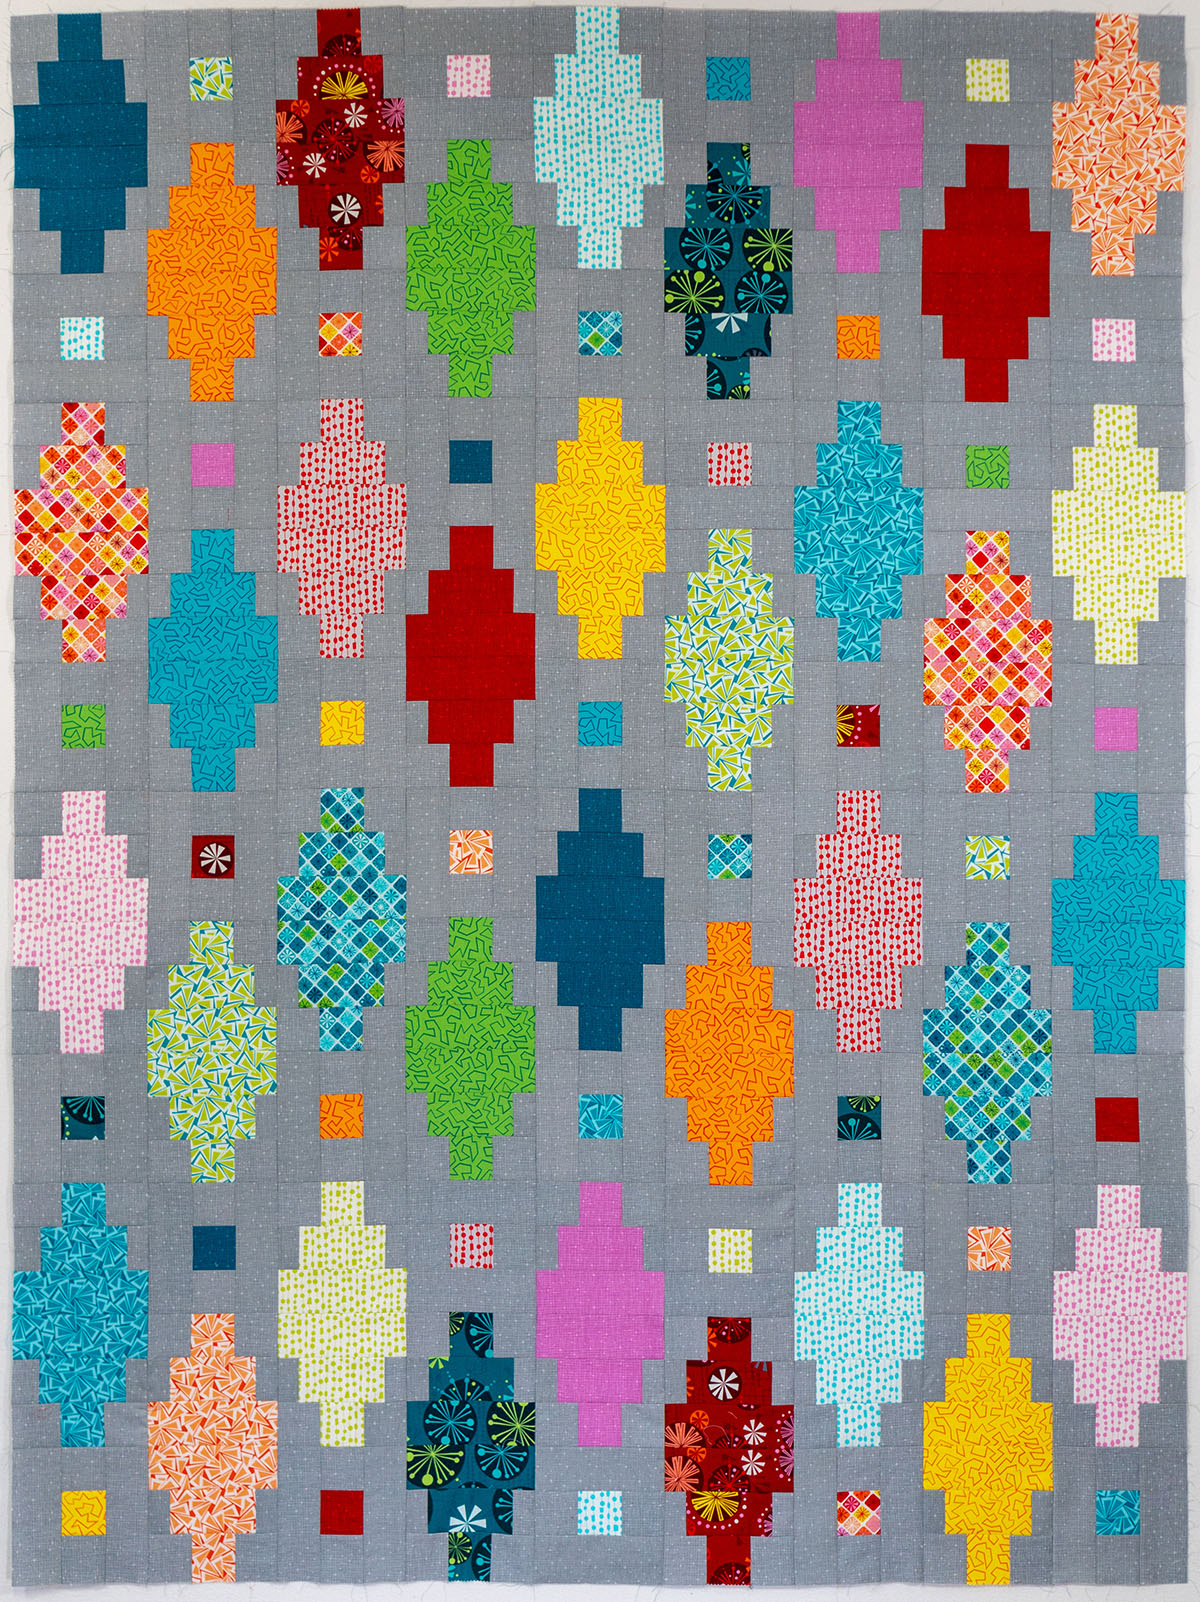 Beaded Lanterns Finished Quilt Top - Fandangle Fabric by Christa Watson